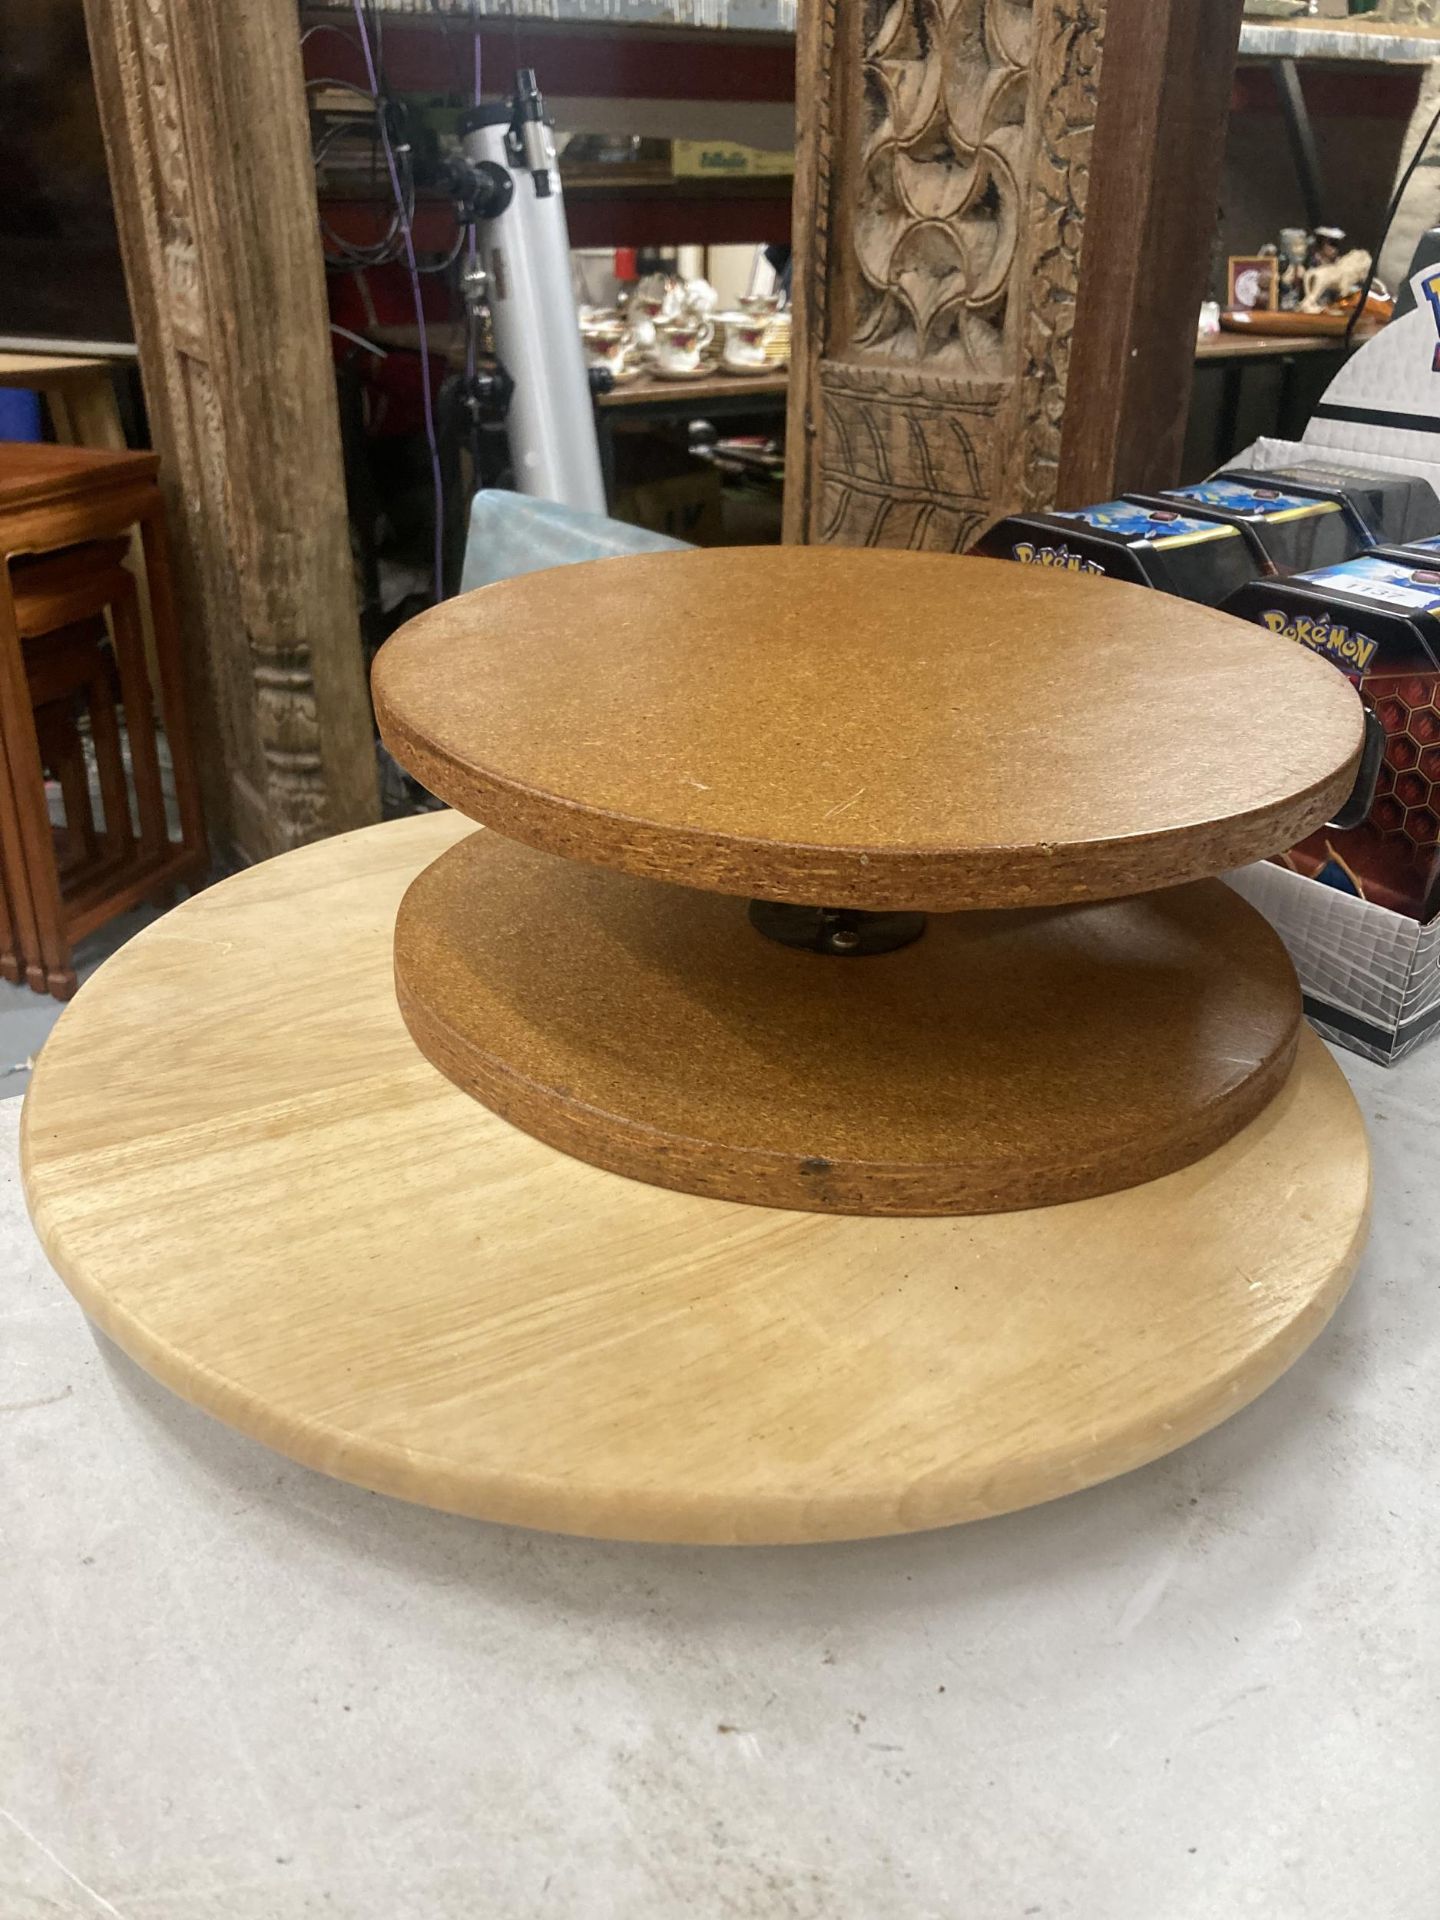 TWO WOODEN TURN TABLES POSSIBLY FOR CAKE DECORATING